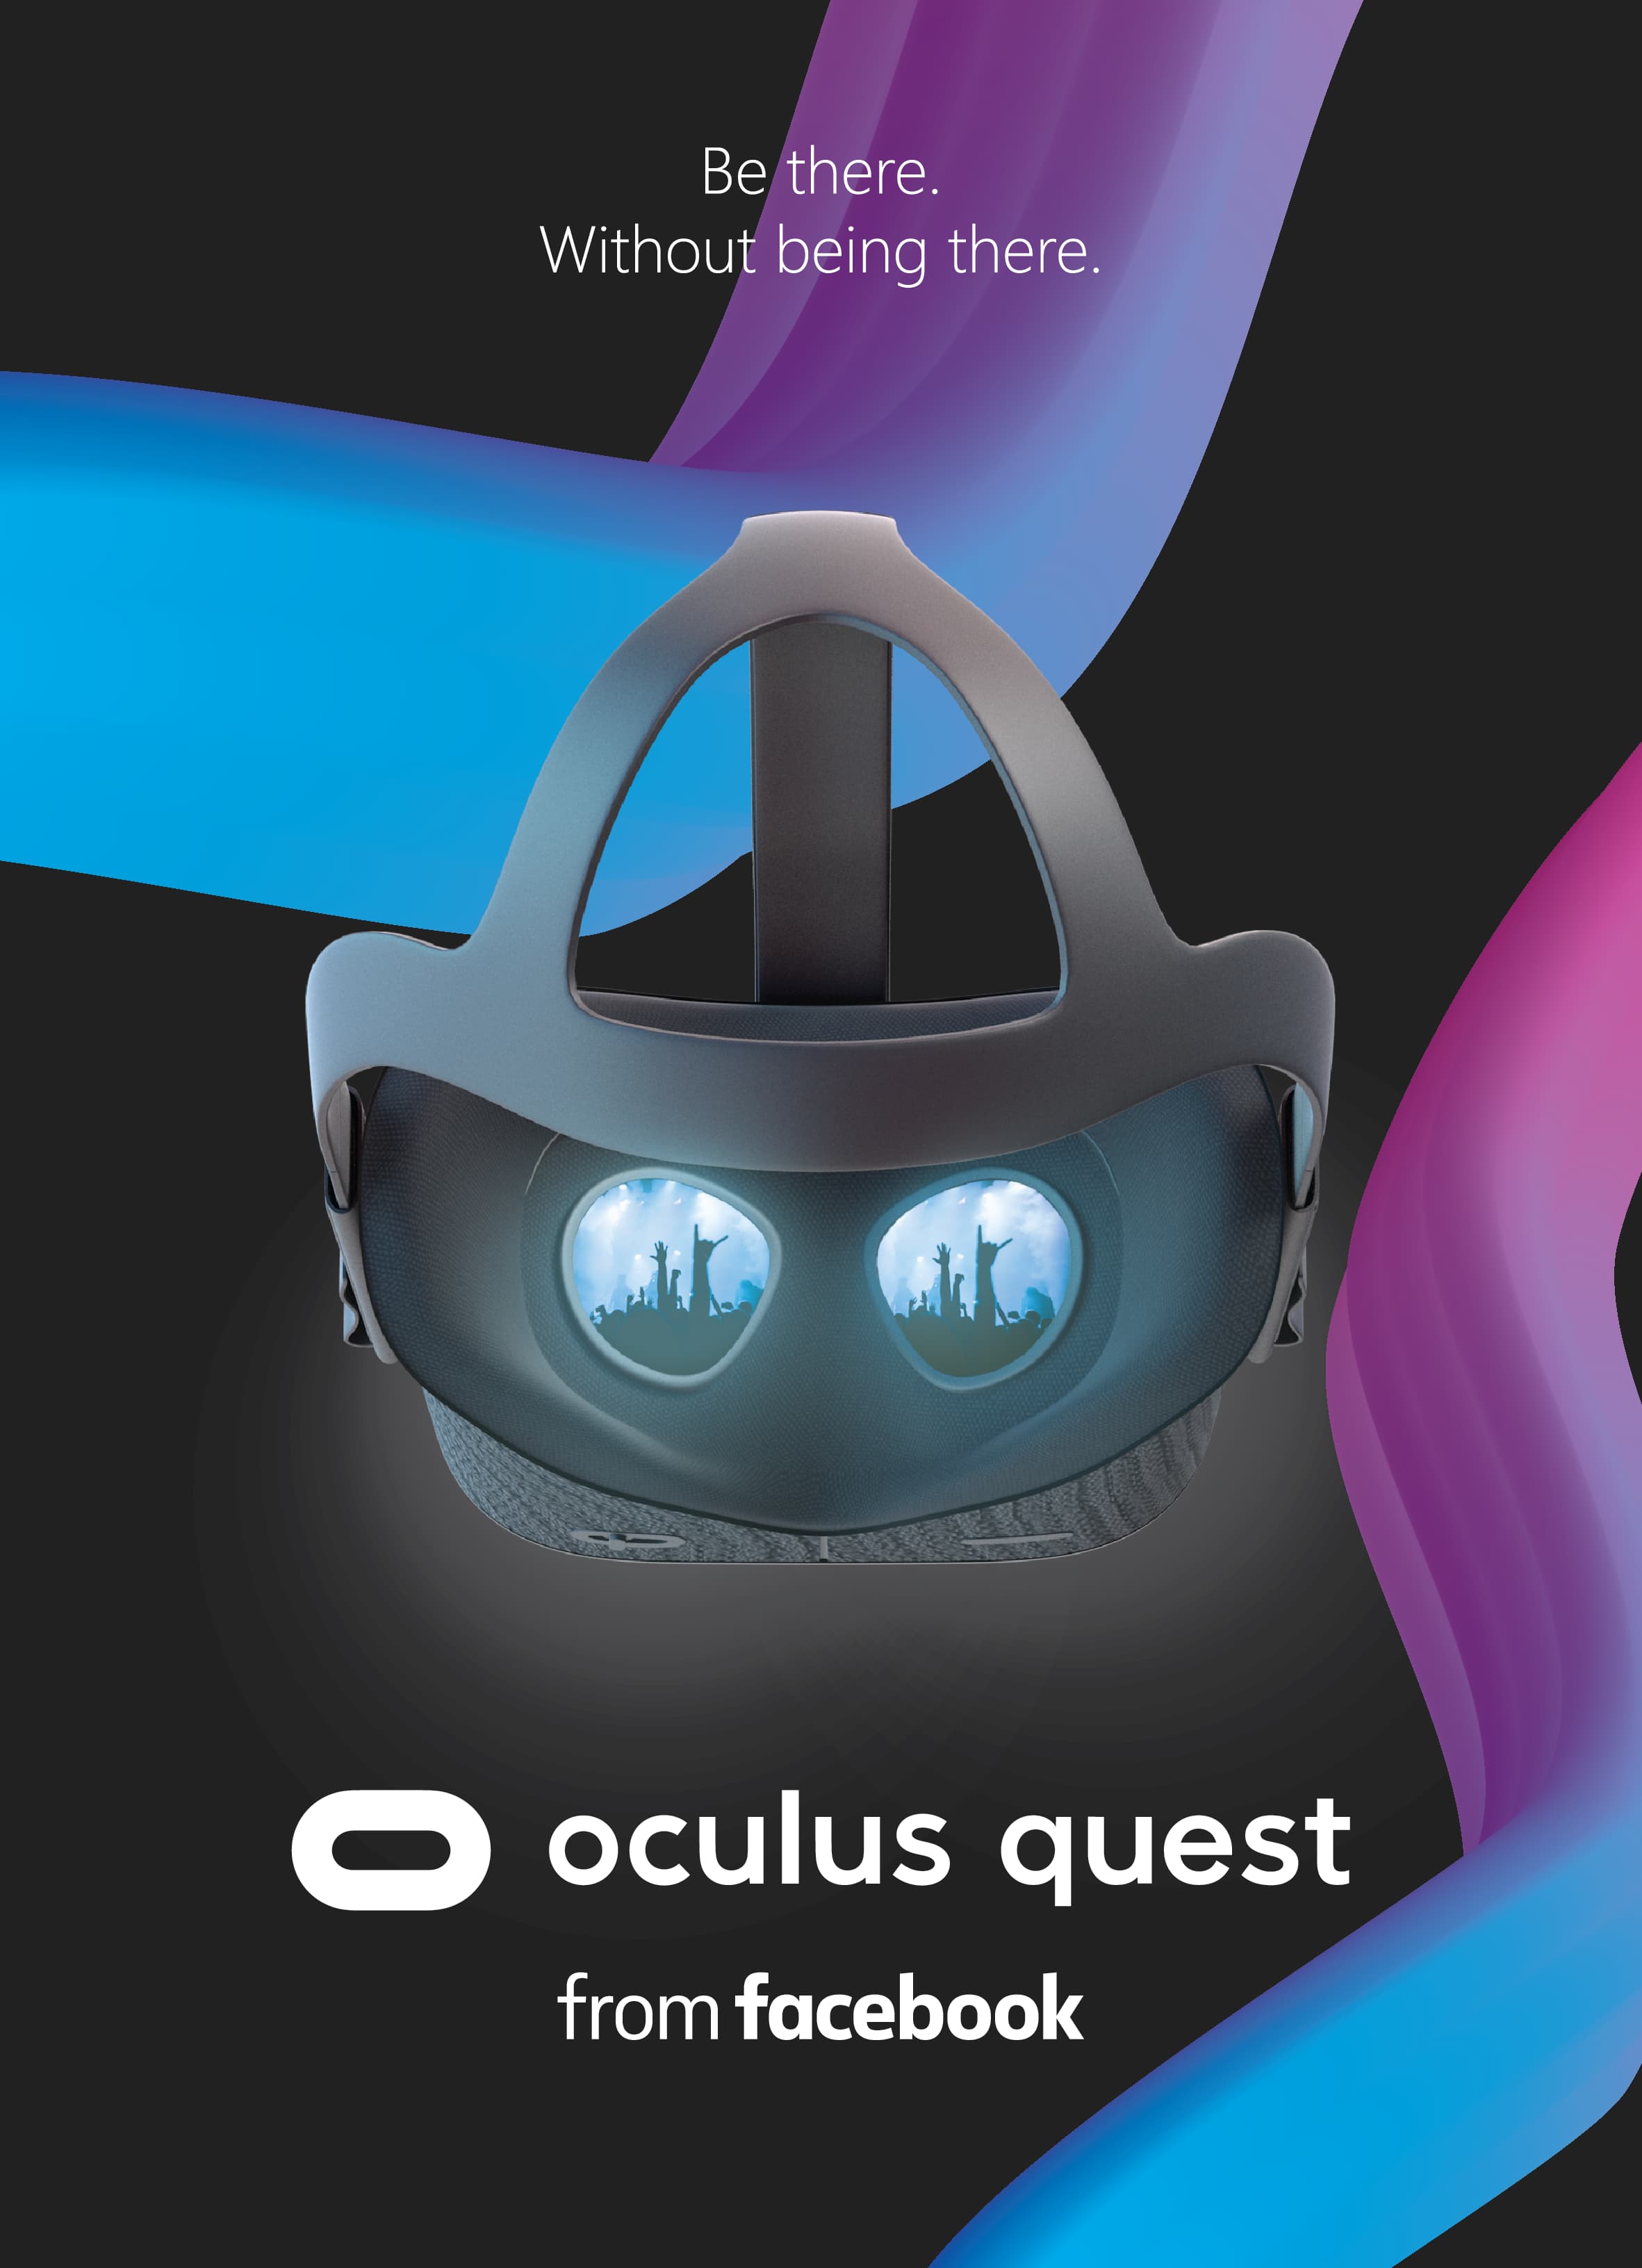 Unnofficial Oculus Quest ad by Sean Truong